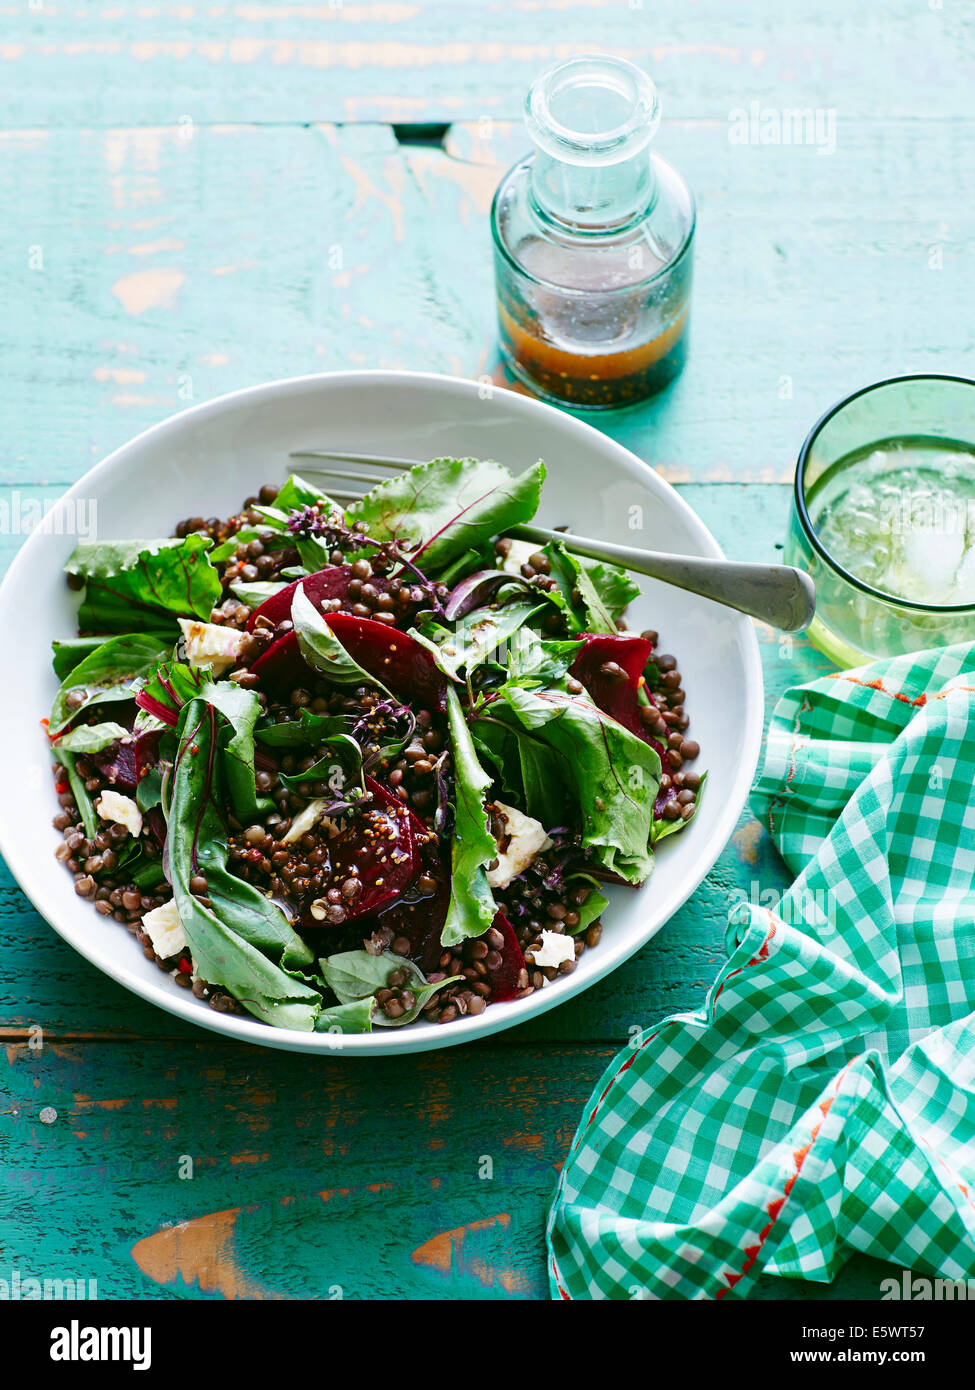 Plate of lentil, beetroot and feta salad Stock Photo